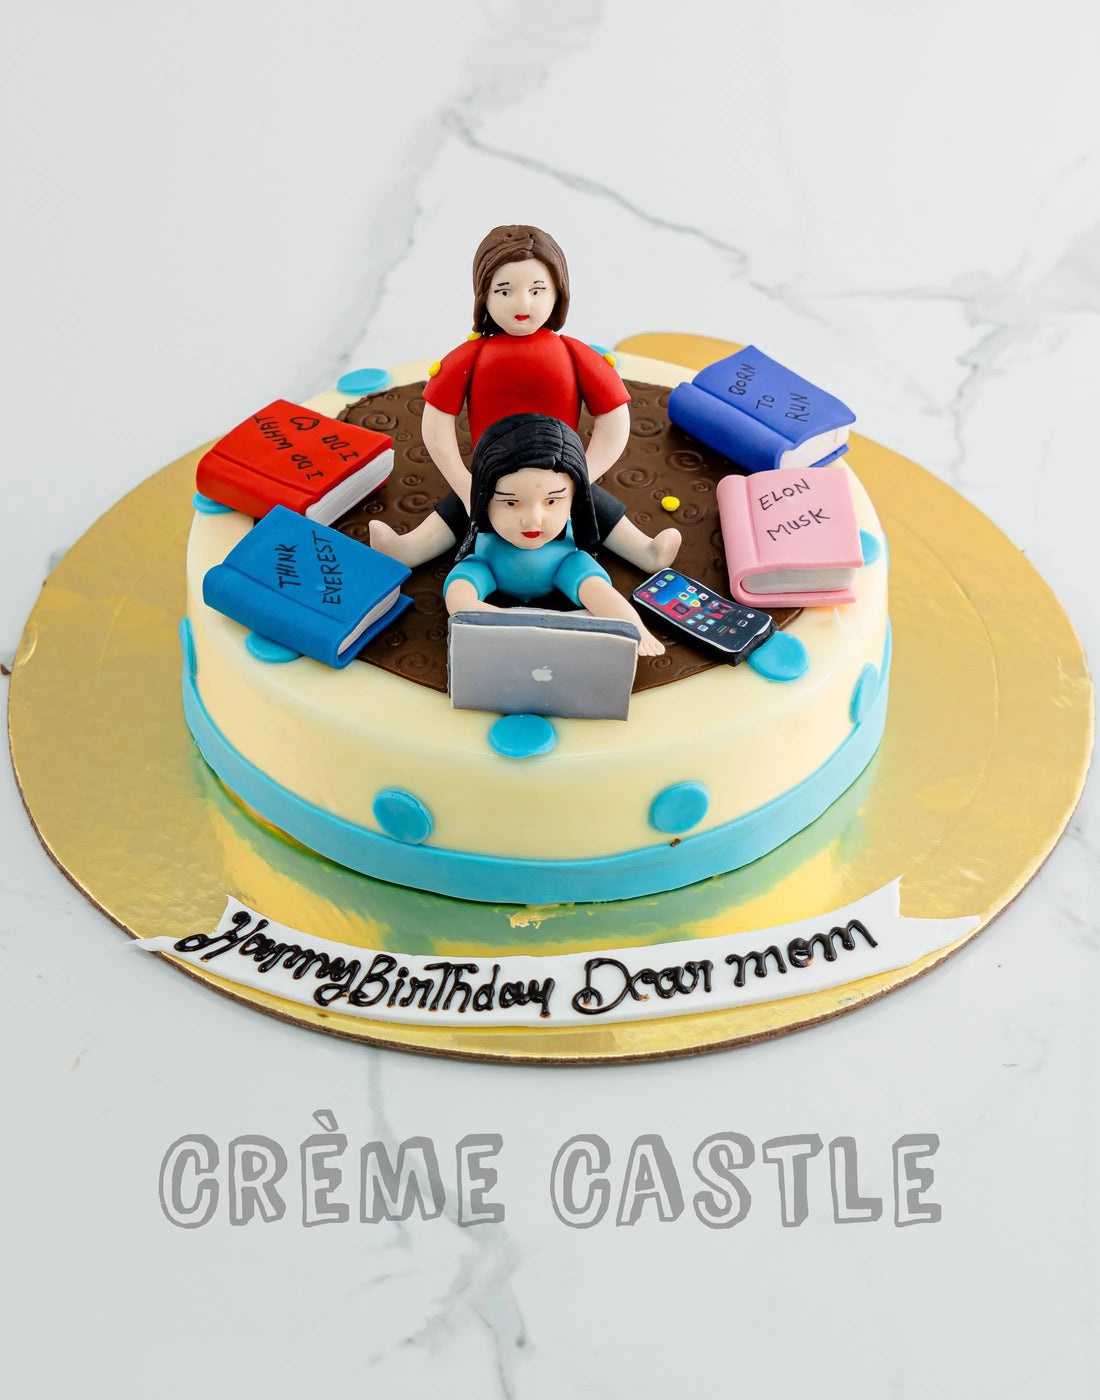 Baby and Working mother theme cake - Customized Cakes Ideas in Noida